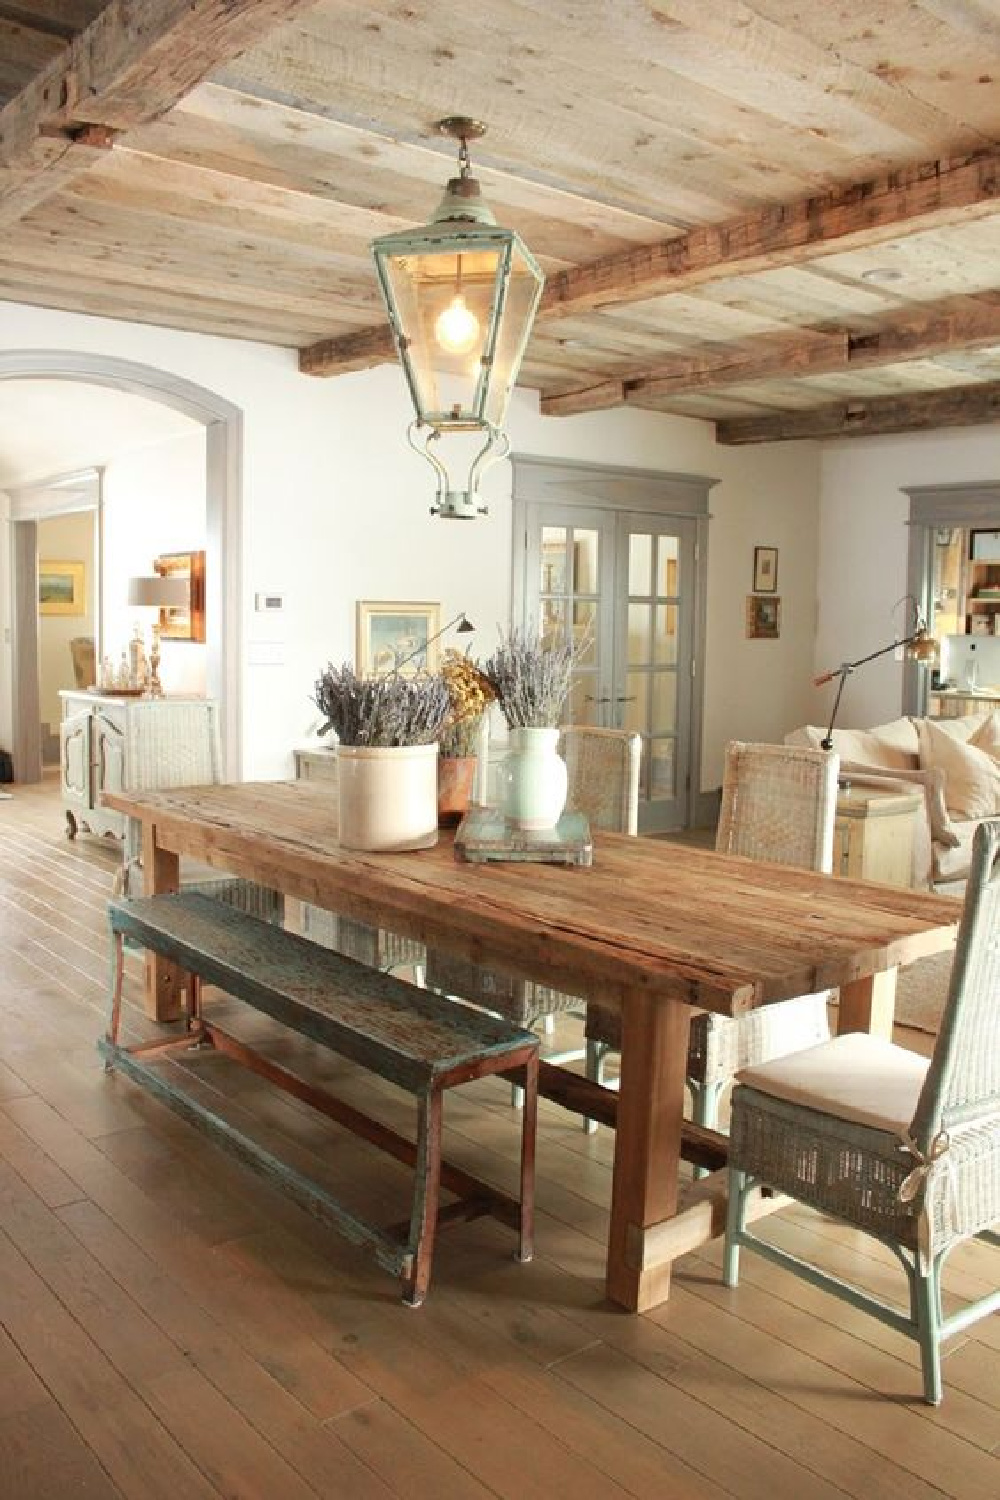 French country dining room in a French and Gustavian inspired home by Desiree Ashworth. #frenchcountrydiningroom